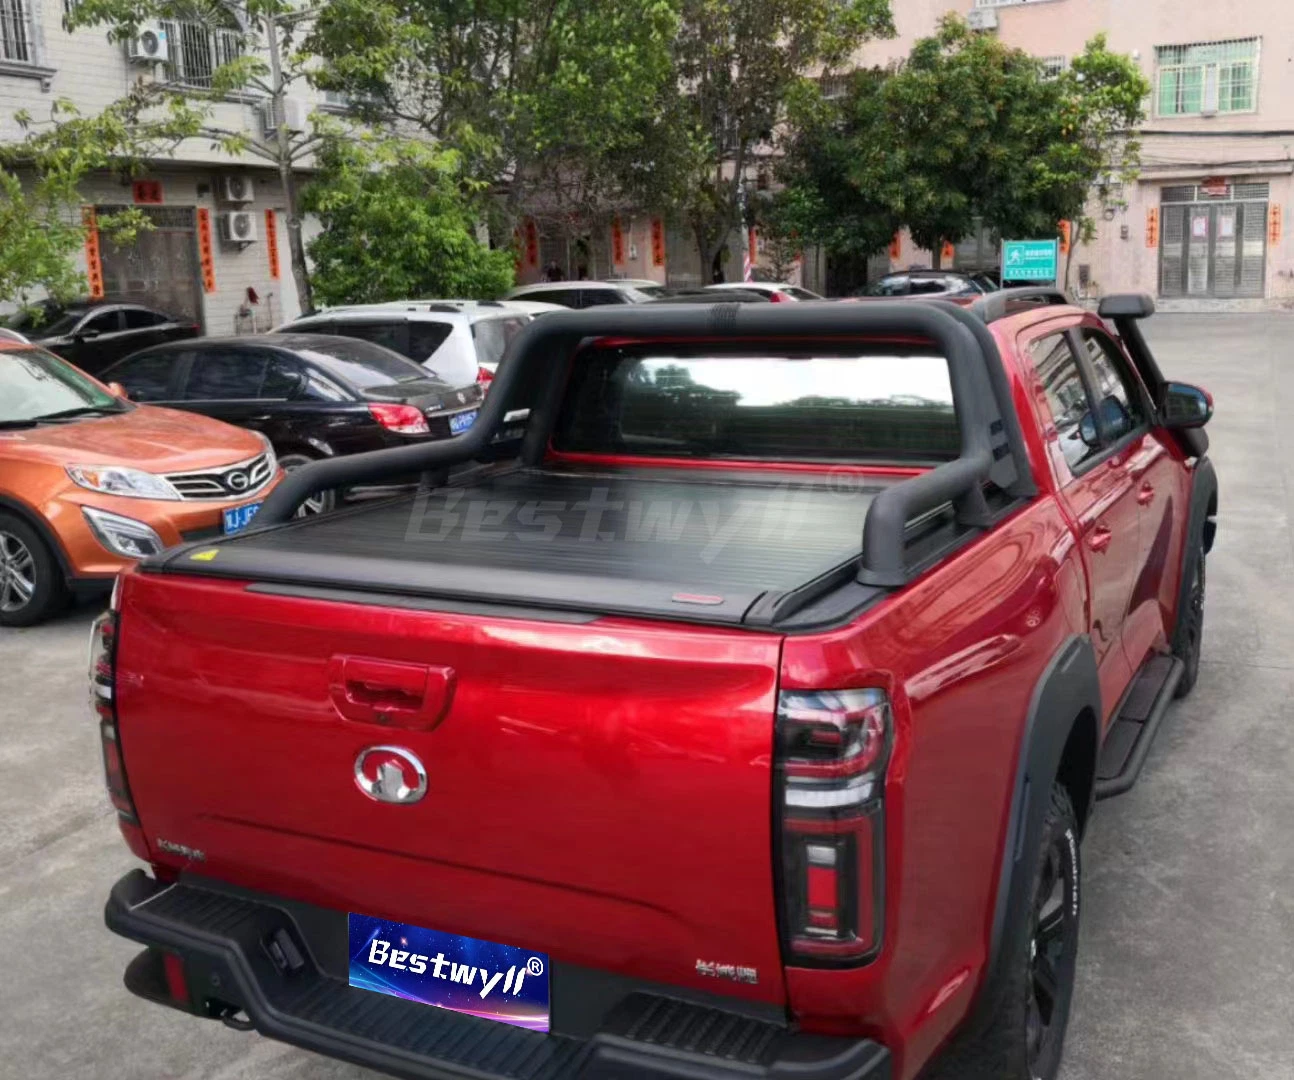 BESTWYLL Hard Bed Pickup Truck Auto Roller Lid Shutter Electric Retractable Tonneau Cover for Great Wall Gwm Cannon Vanta E-K35A